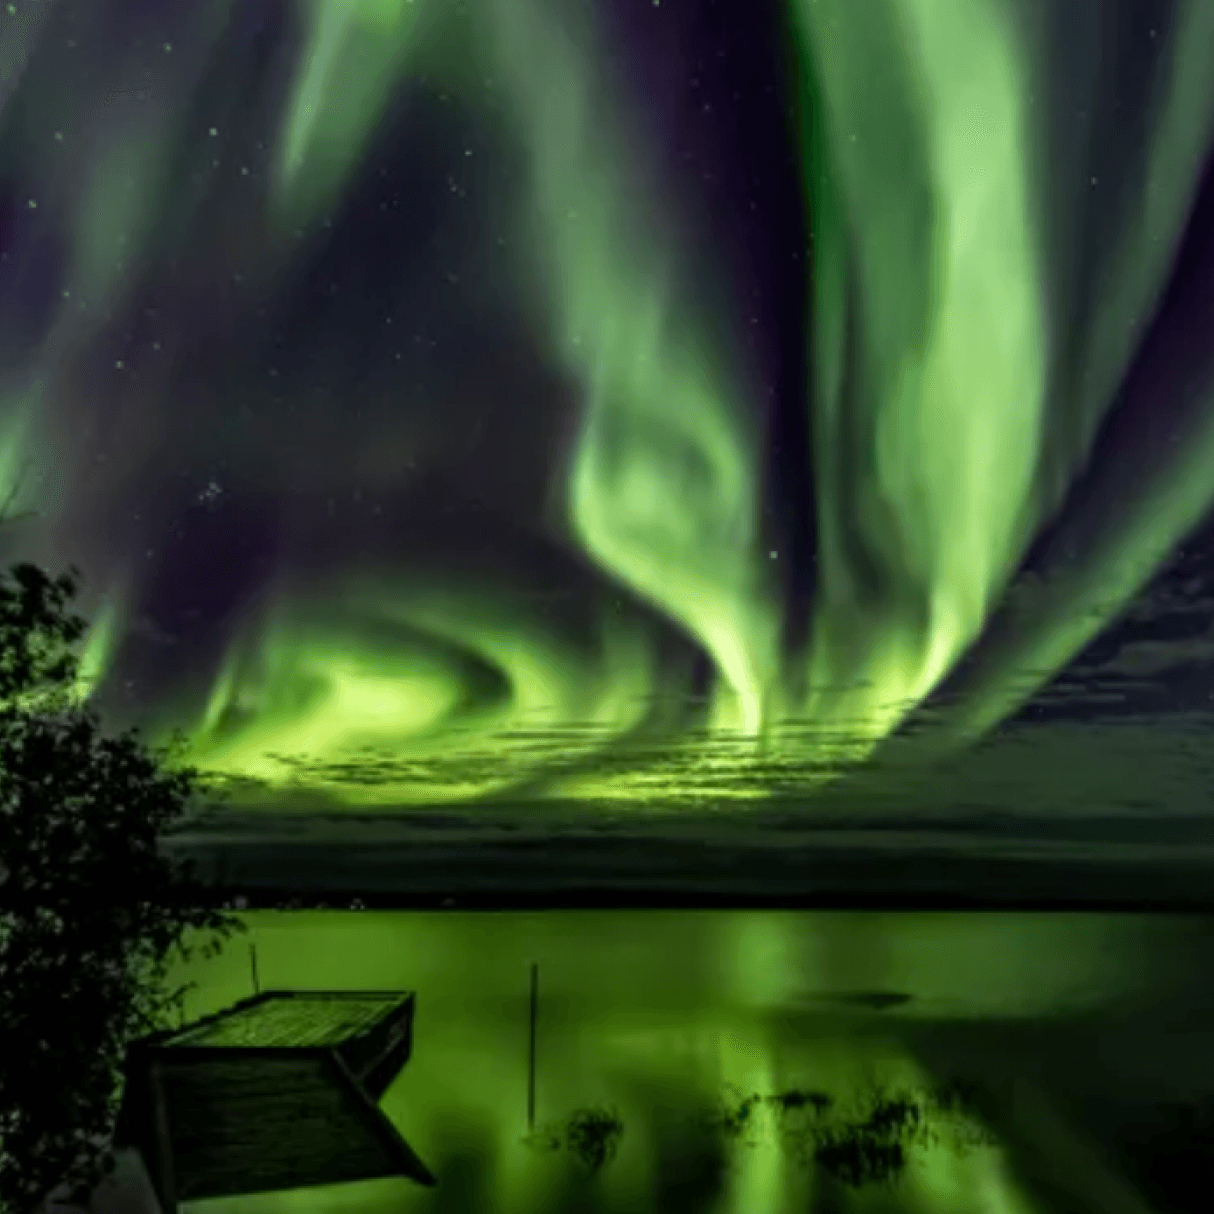 Green northern lights that dance across the night sky are reflected back on a calm lake below.